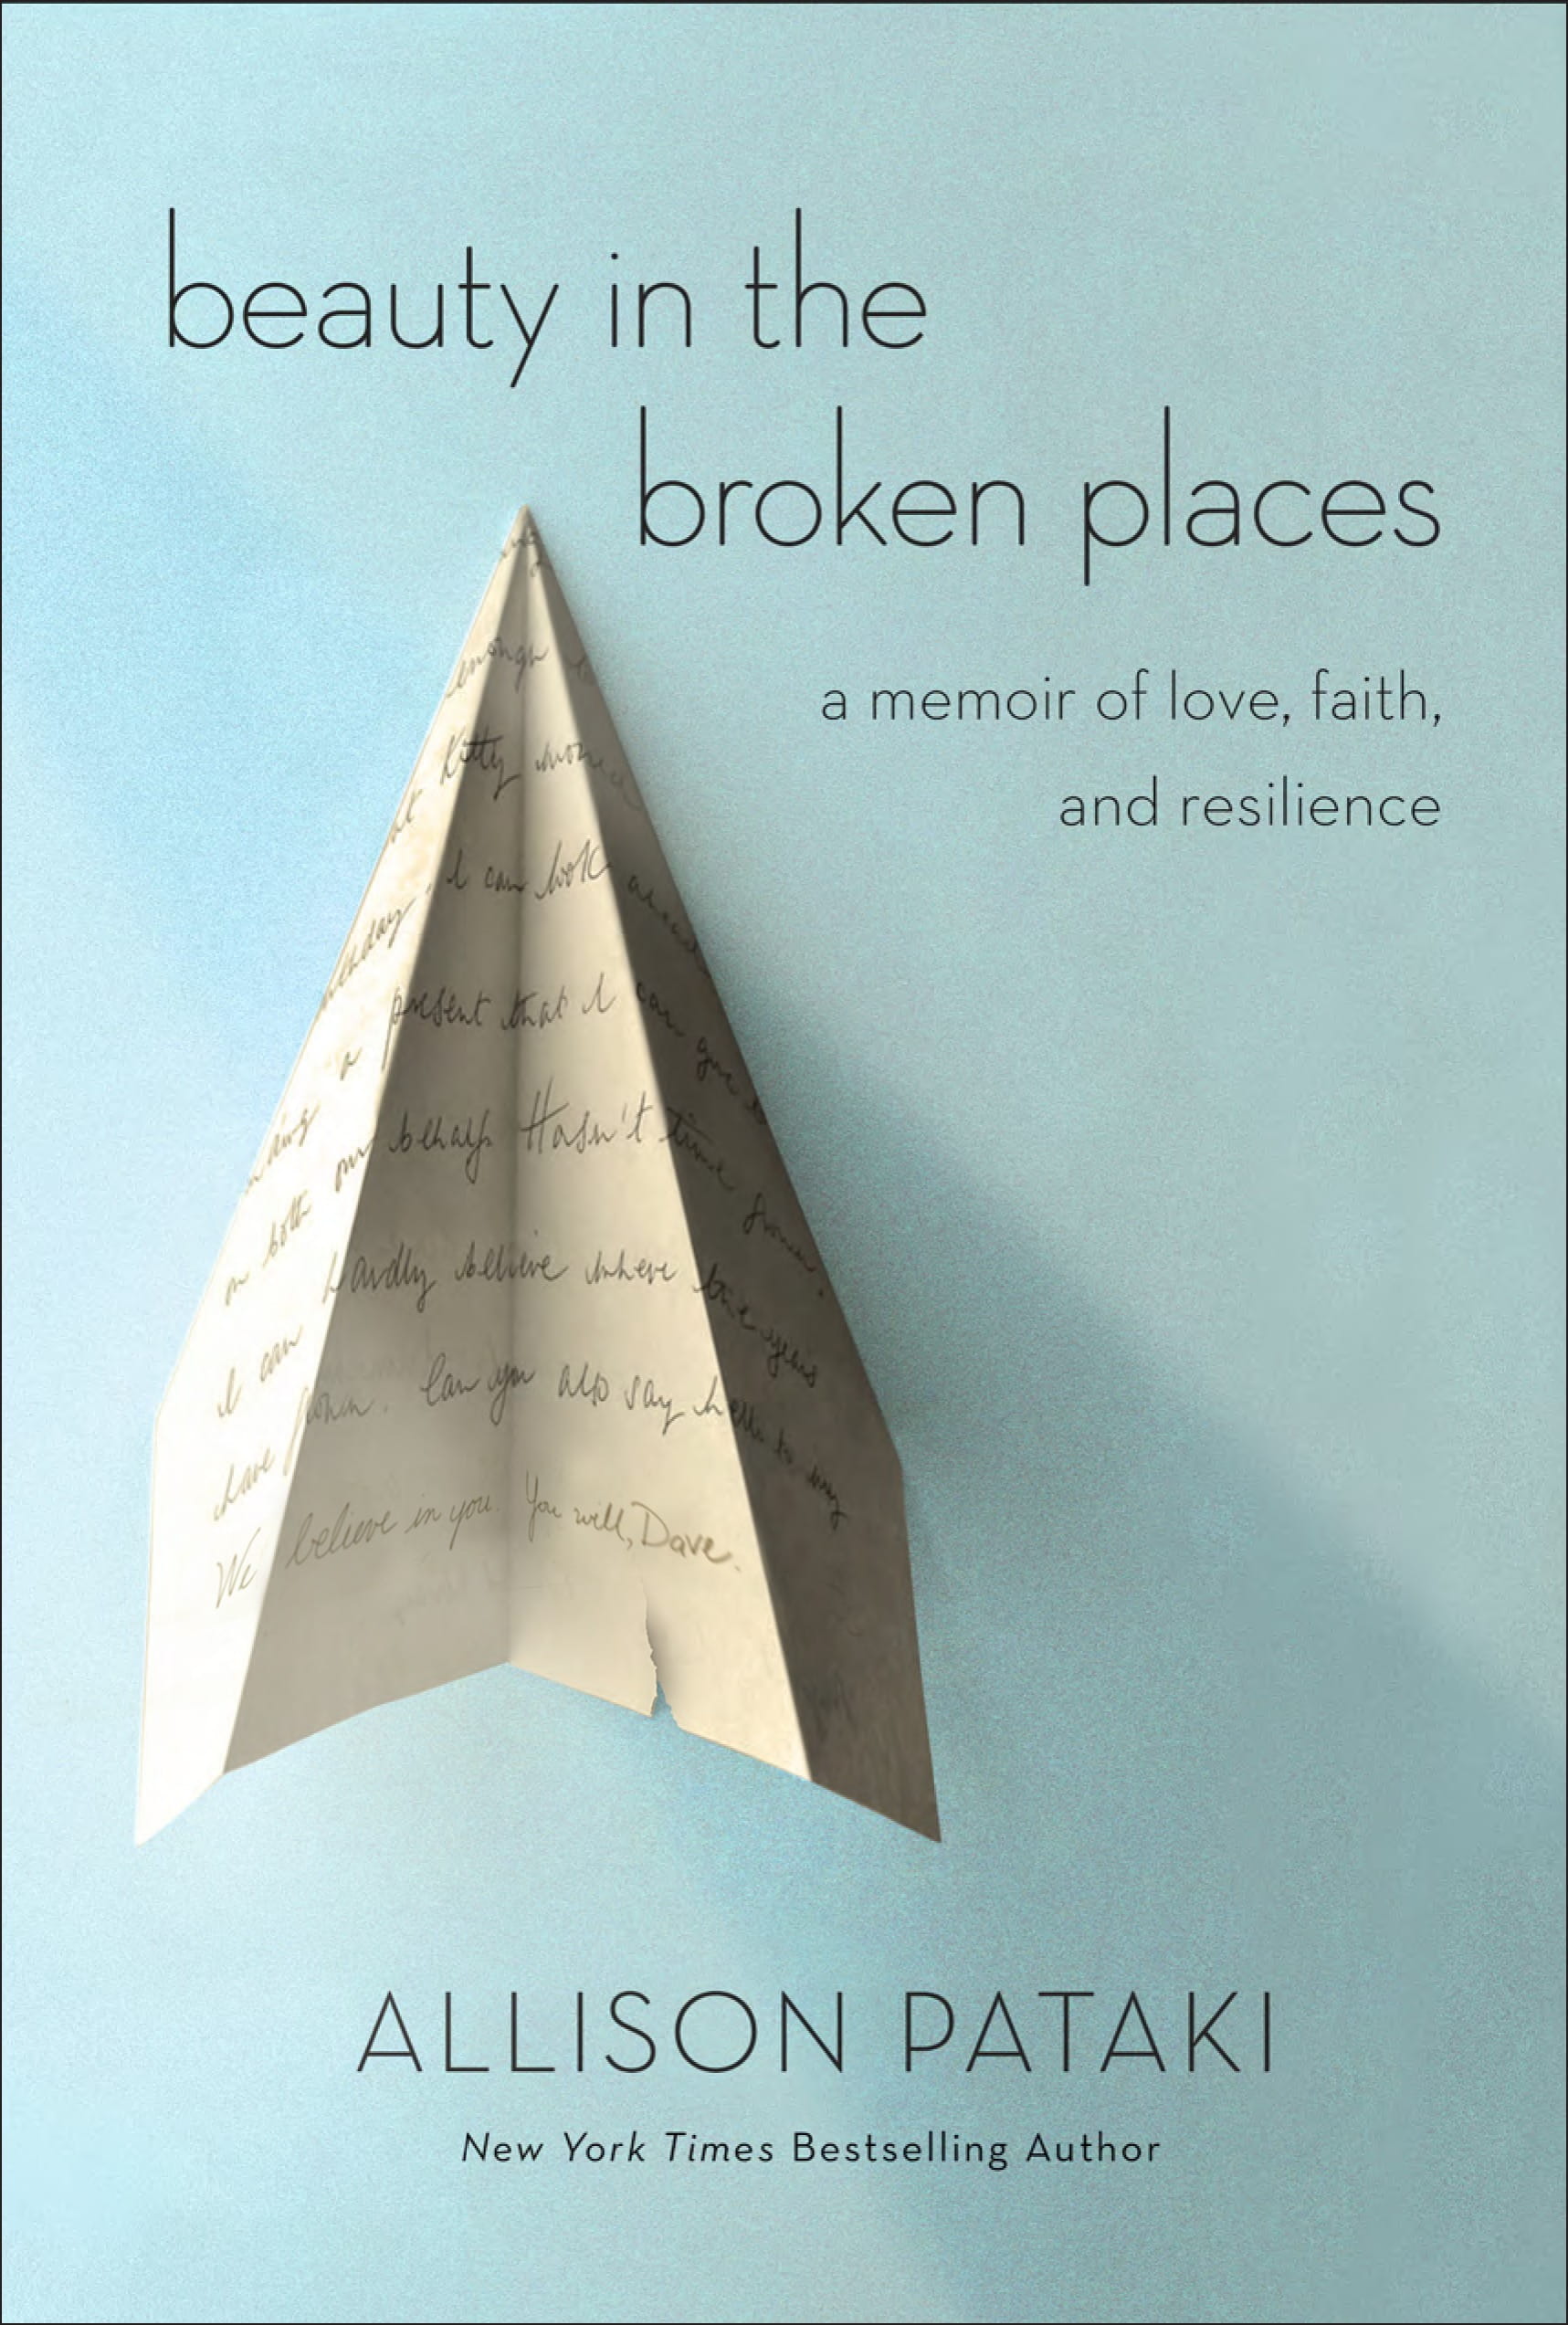 Beauty in the Broken Places, a memoir by Dave Levy's wife Allison Pataki.